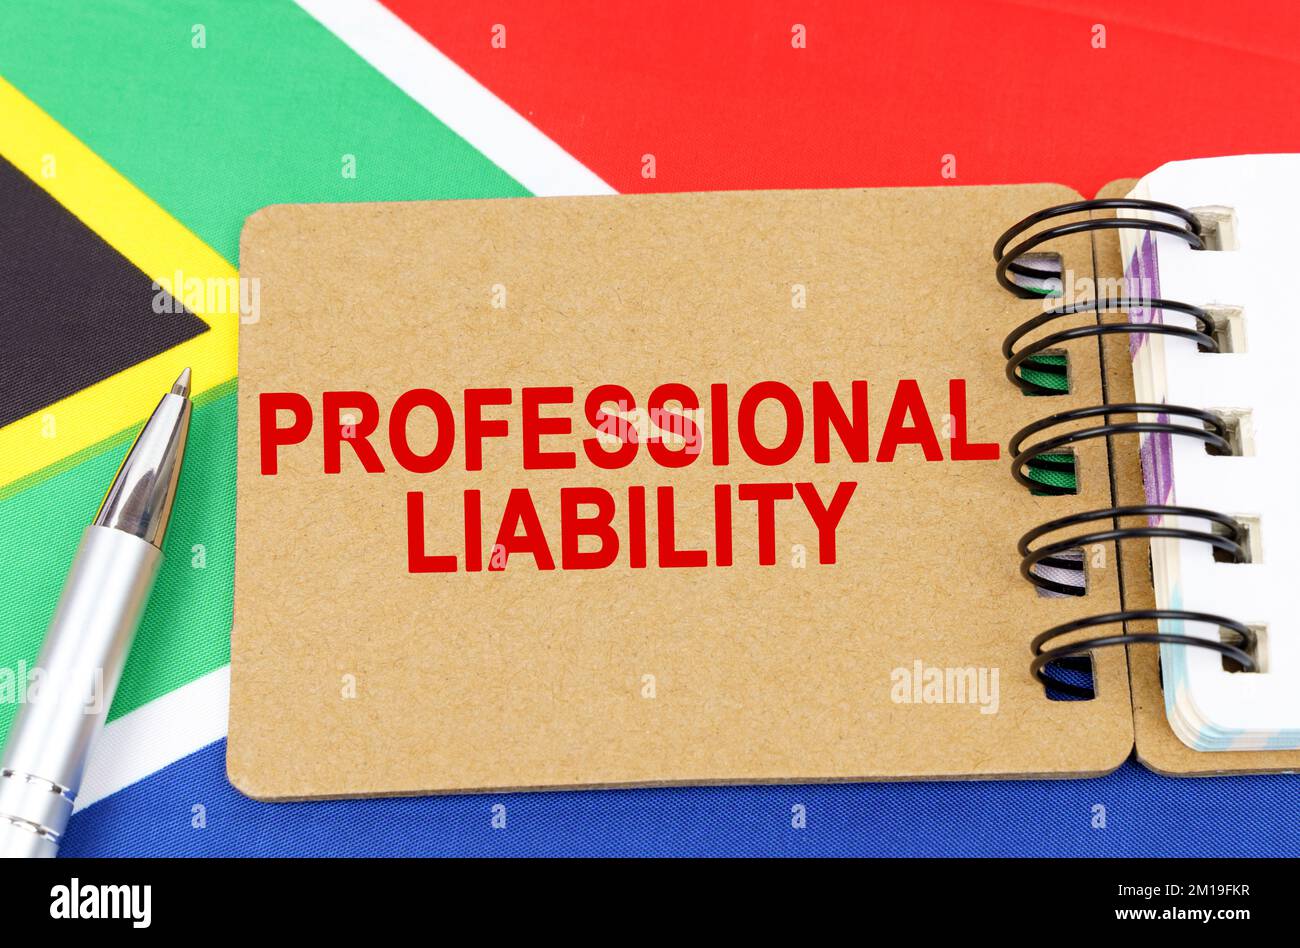 Law and justice concept. Against the background of the flag of South Africa lies a notebook with the inscription - PROFESSIONAL LIABILITY Stock Photo